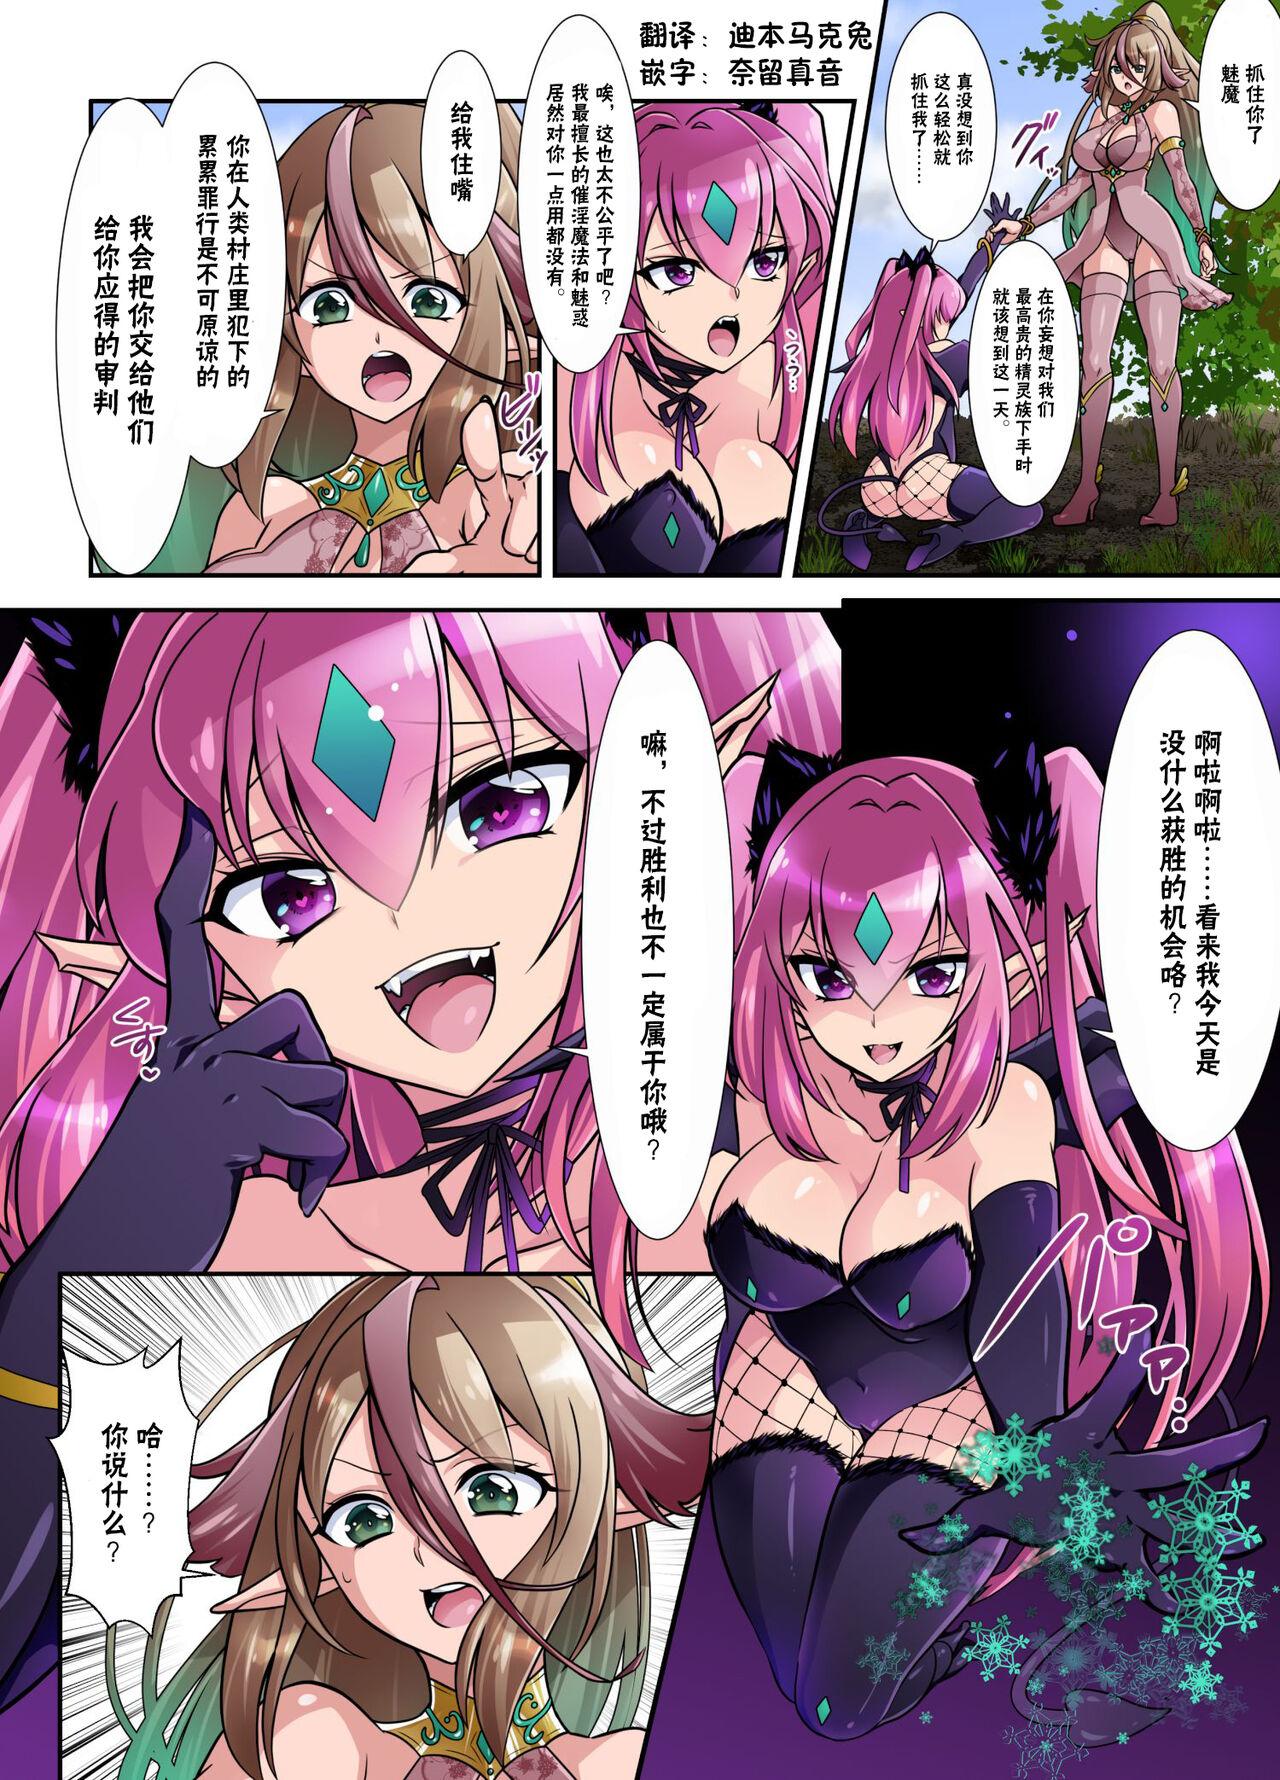 Hot Blow Jobs Elf Taken Over By Succubus - Original Club - Page 1